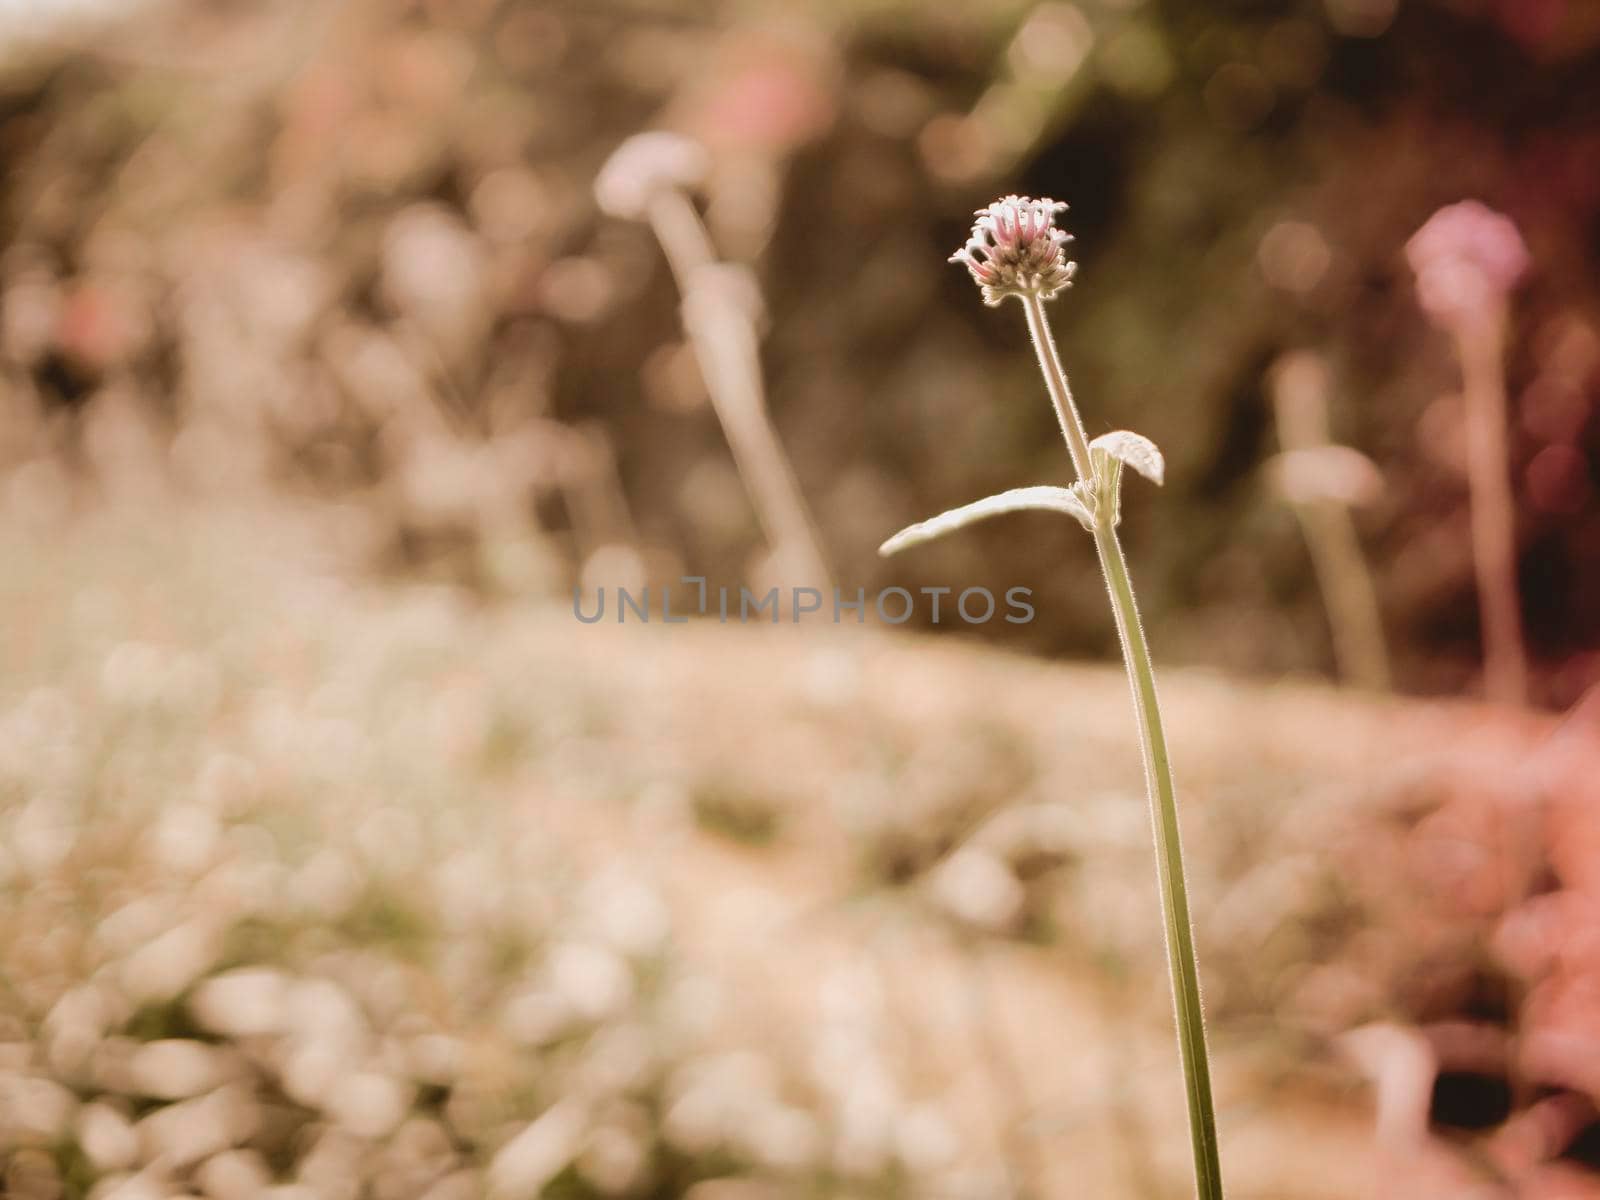 Wild grass flower vintage background little flowers, nature beautiful, toning design spring nature, sun plants by Petrichor